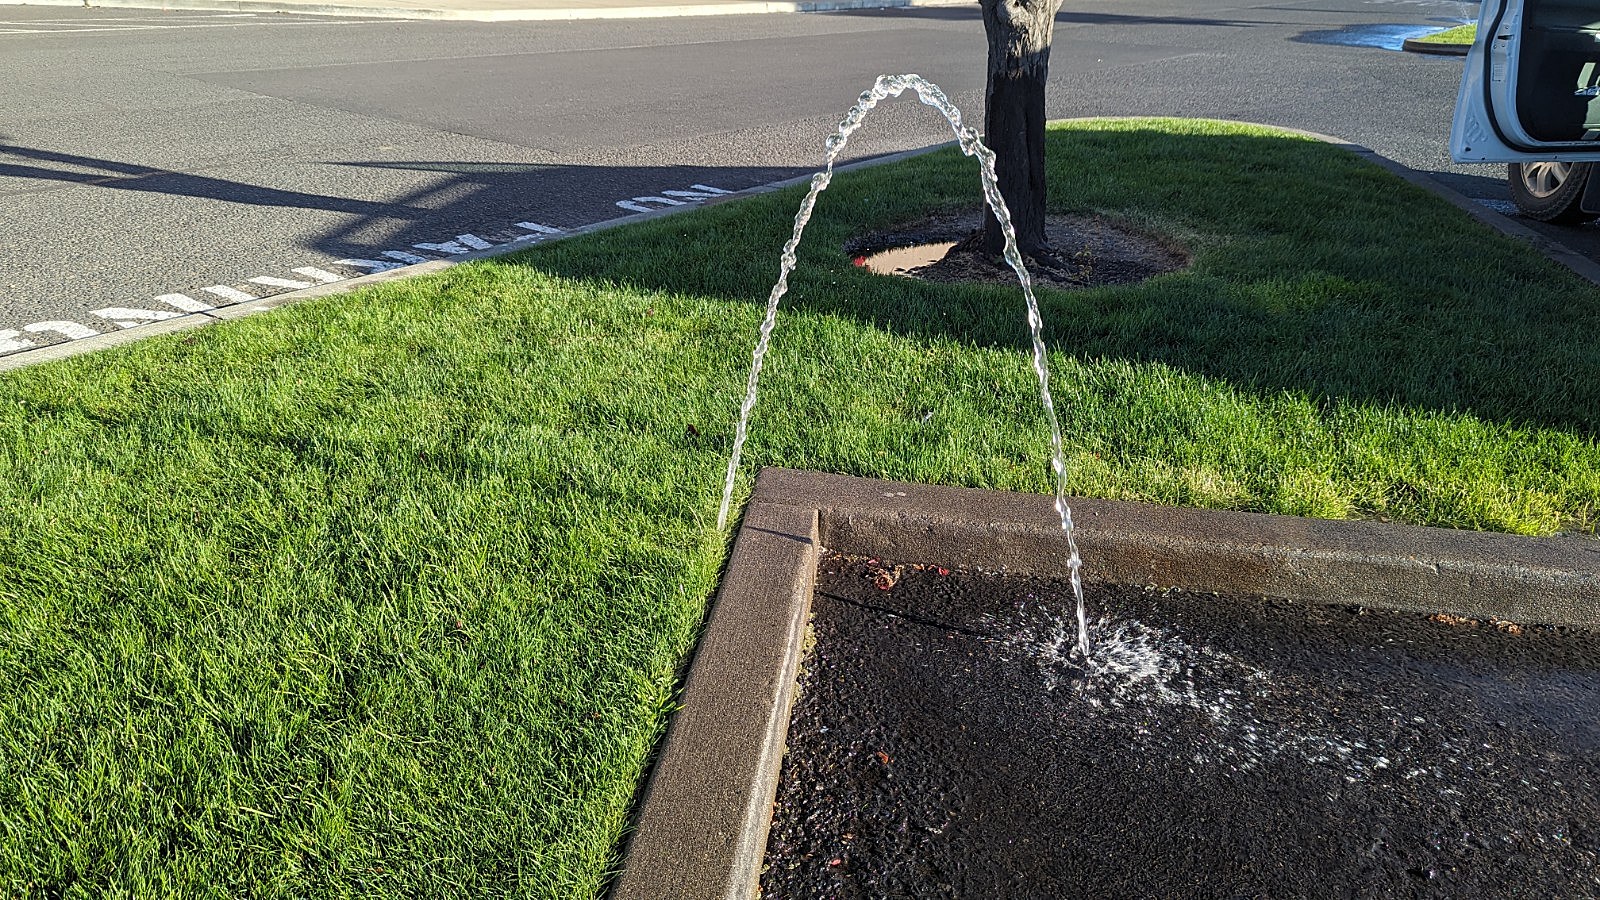 The Orchards Rivals Miller Park for Best Place for Water Fountains in Yakima pic